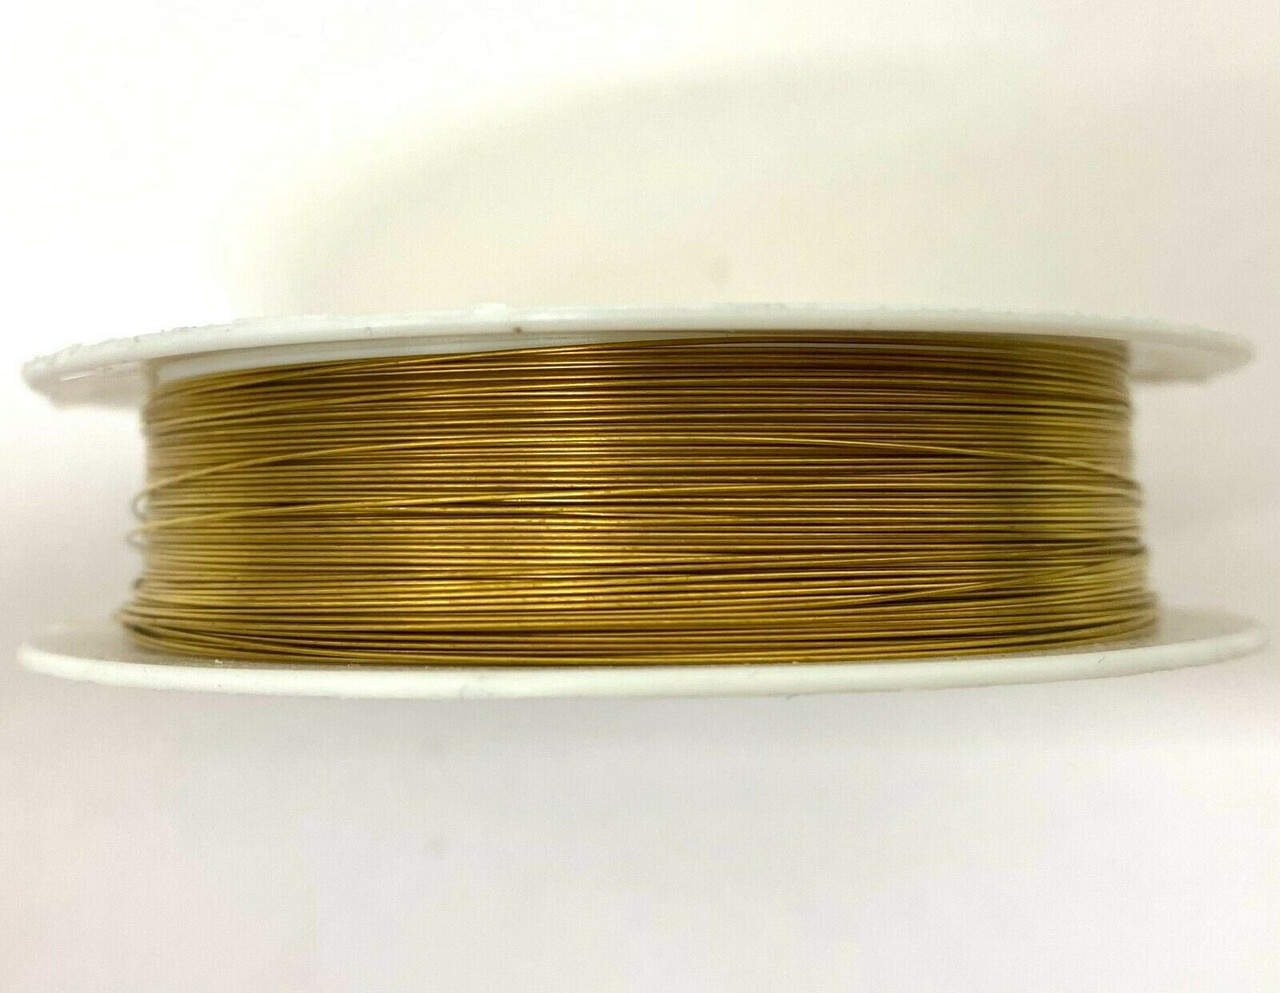 Roll of Copper Wire, 0.8mm thickness, OLD GOLD colour, approx 4m length